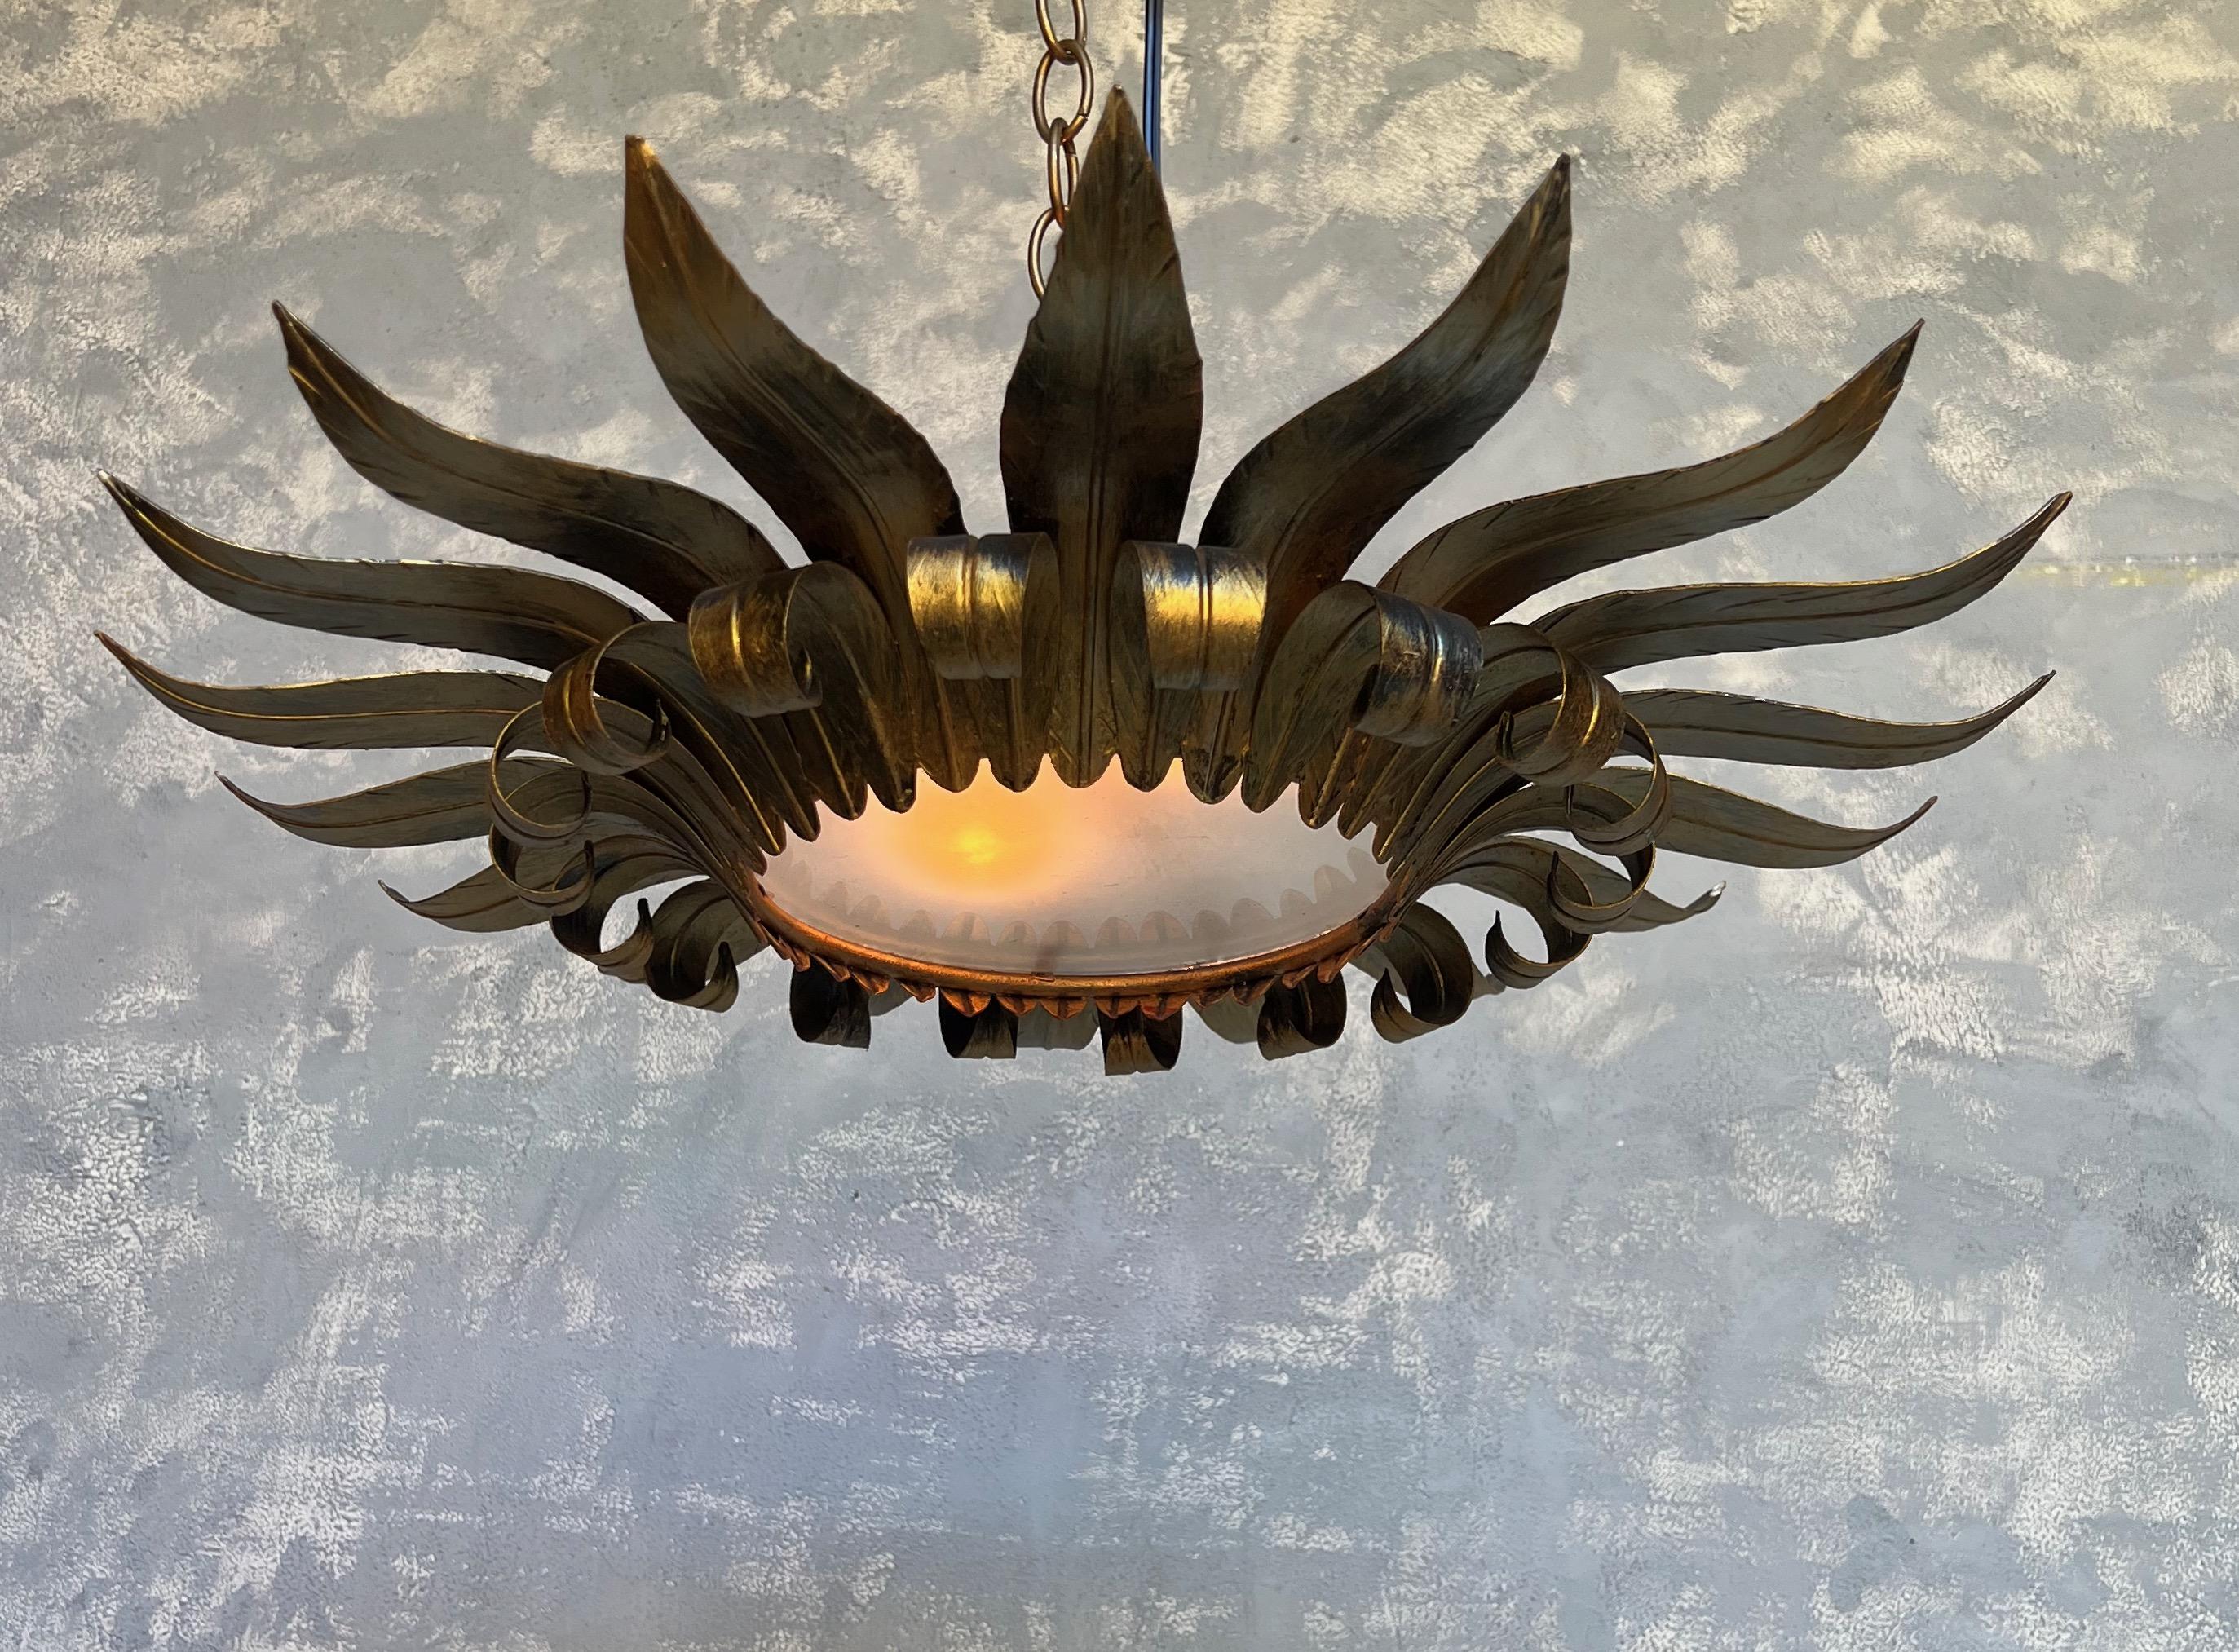 A large flush mount ceiling fixture with double tiered leaf patterns, the upper tier being pointed out while the lower tier curls under. The hand applied finish has a rich gold patina with darker under tones showing through.
This fixture has been